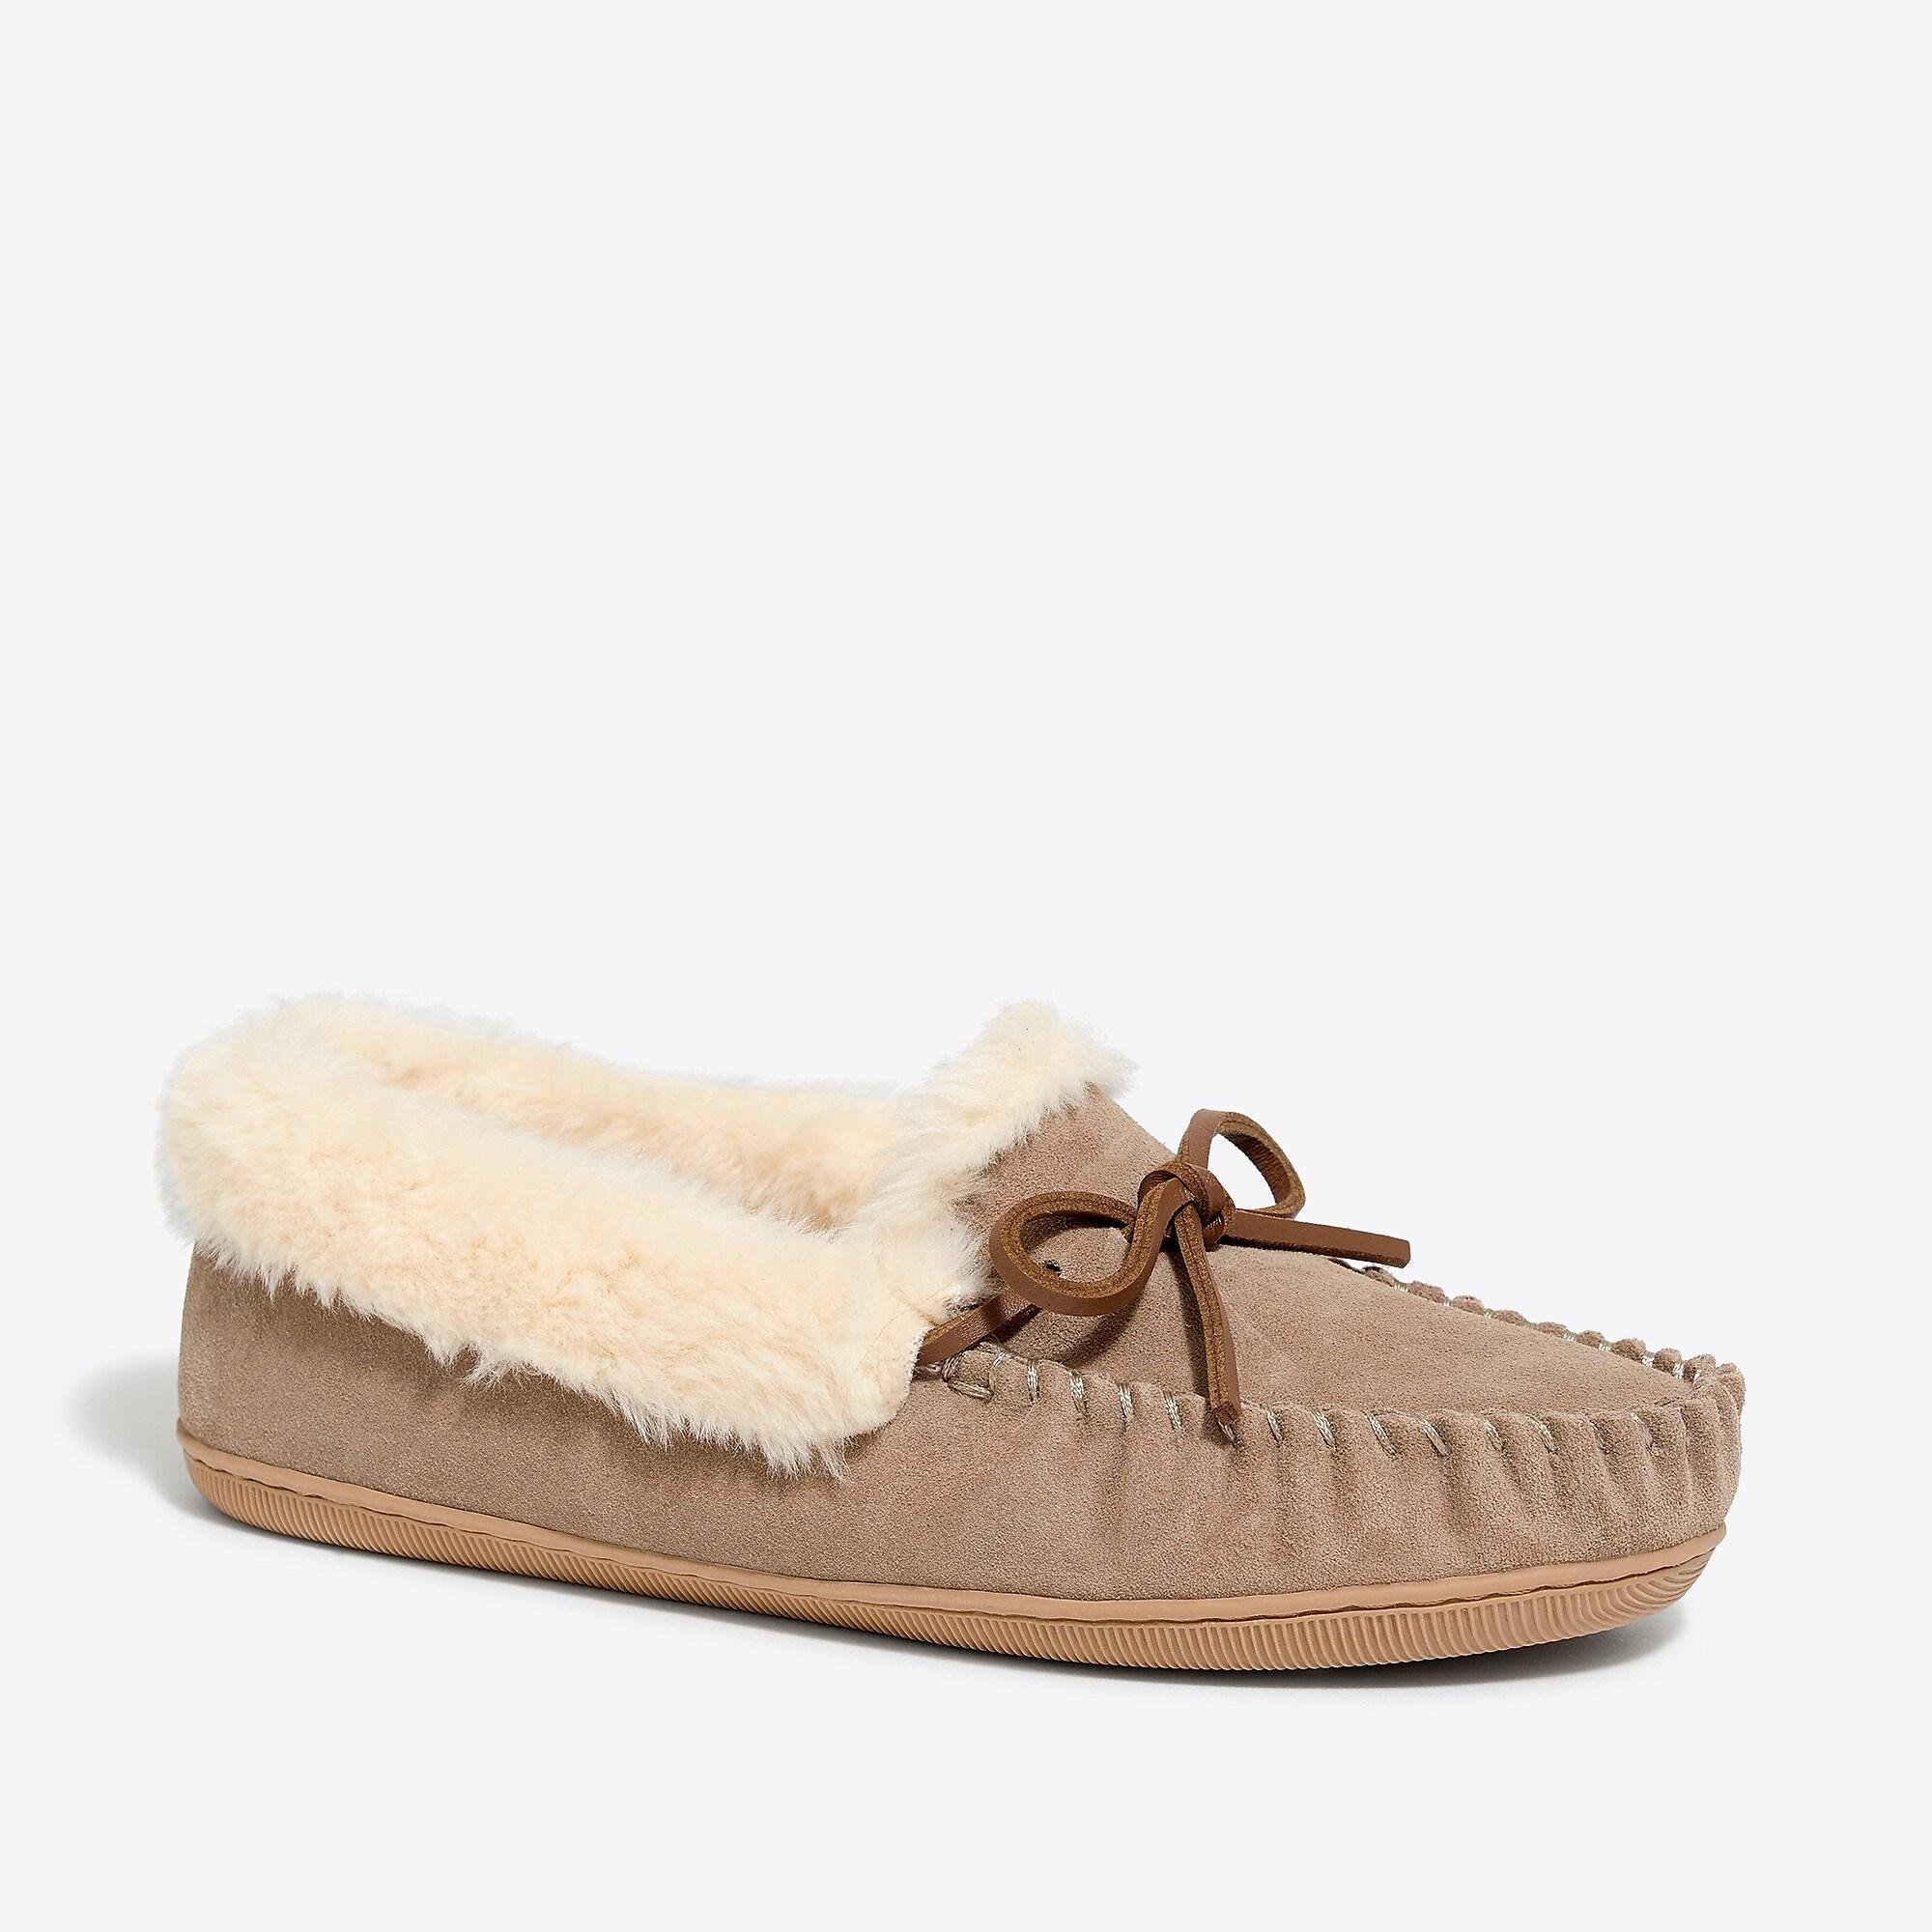 J.Crew Suede Shearling Moccasin Slippers in Ash (Brown) - Lyst